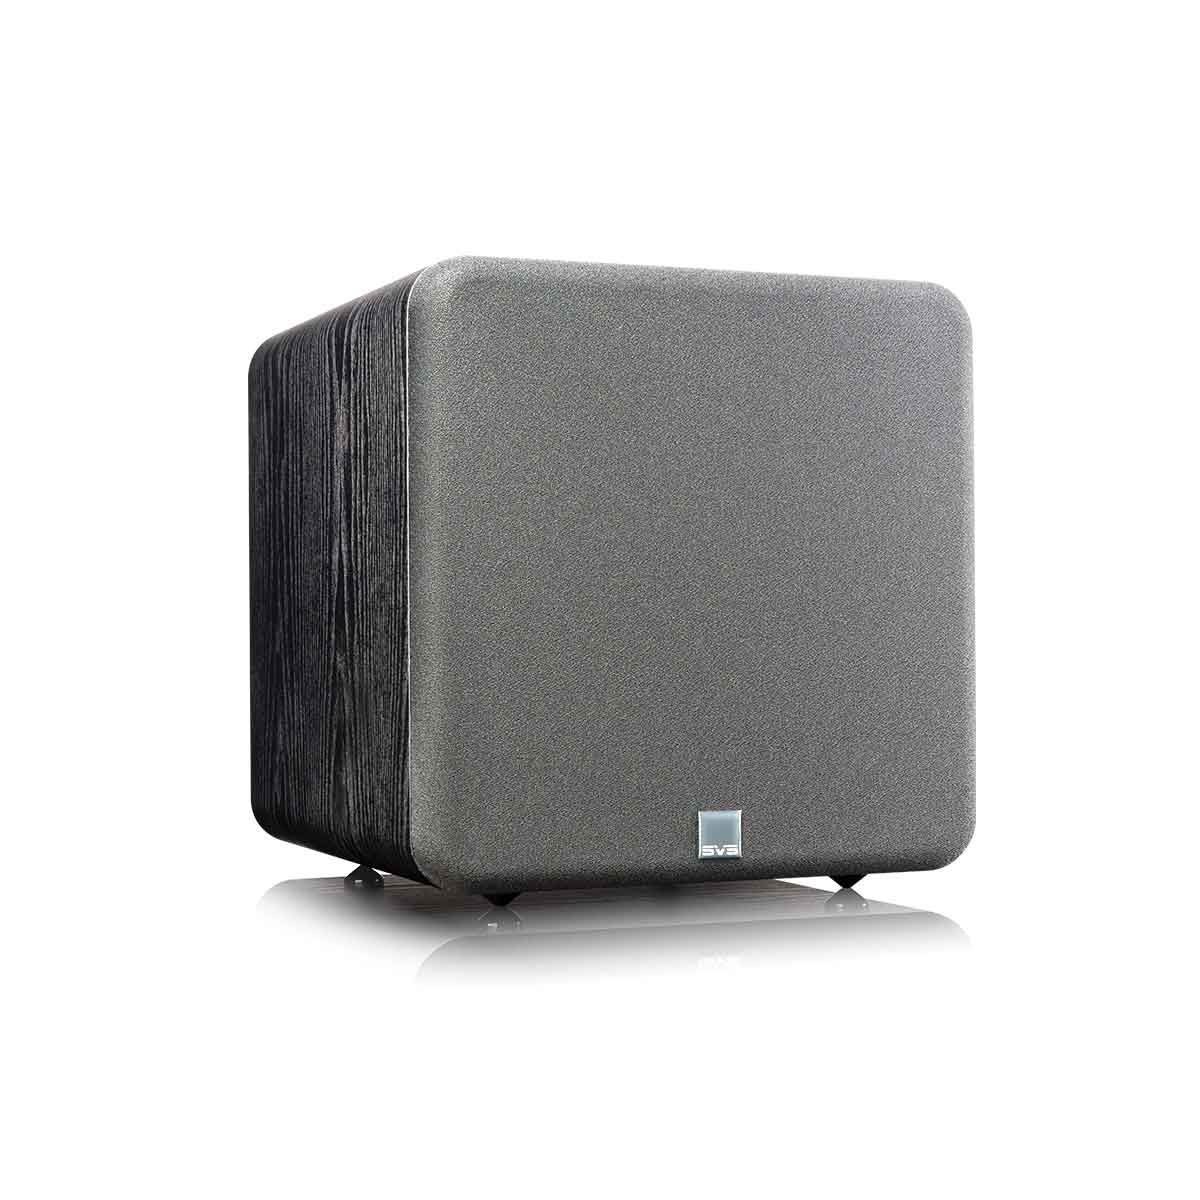 SVS SB-1000 Pro Series Subwoofer with grill